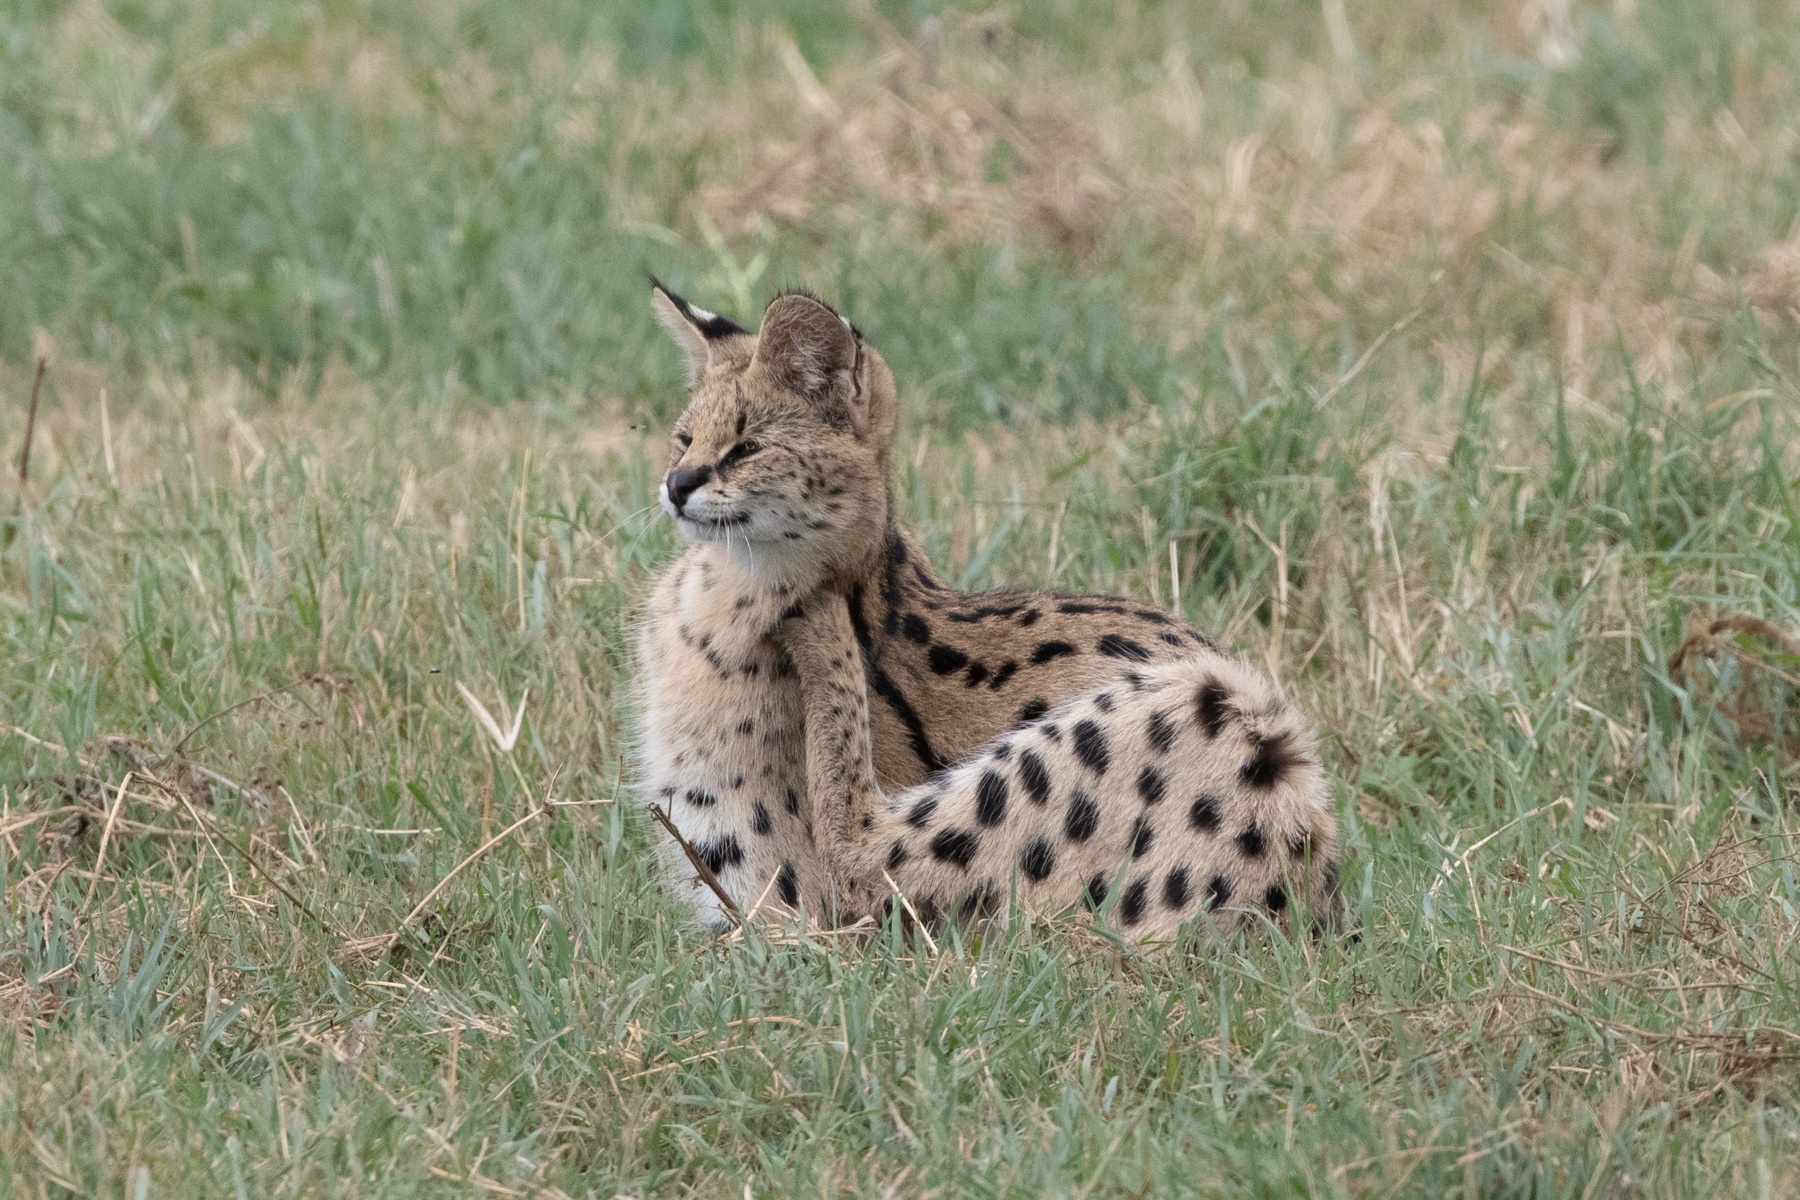 A beautiful Serval scratching an itch